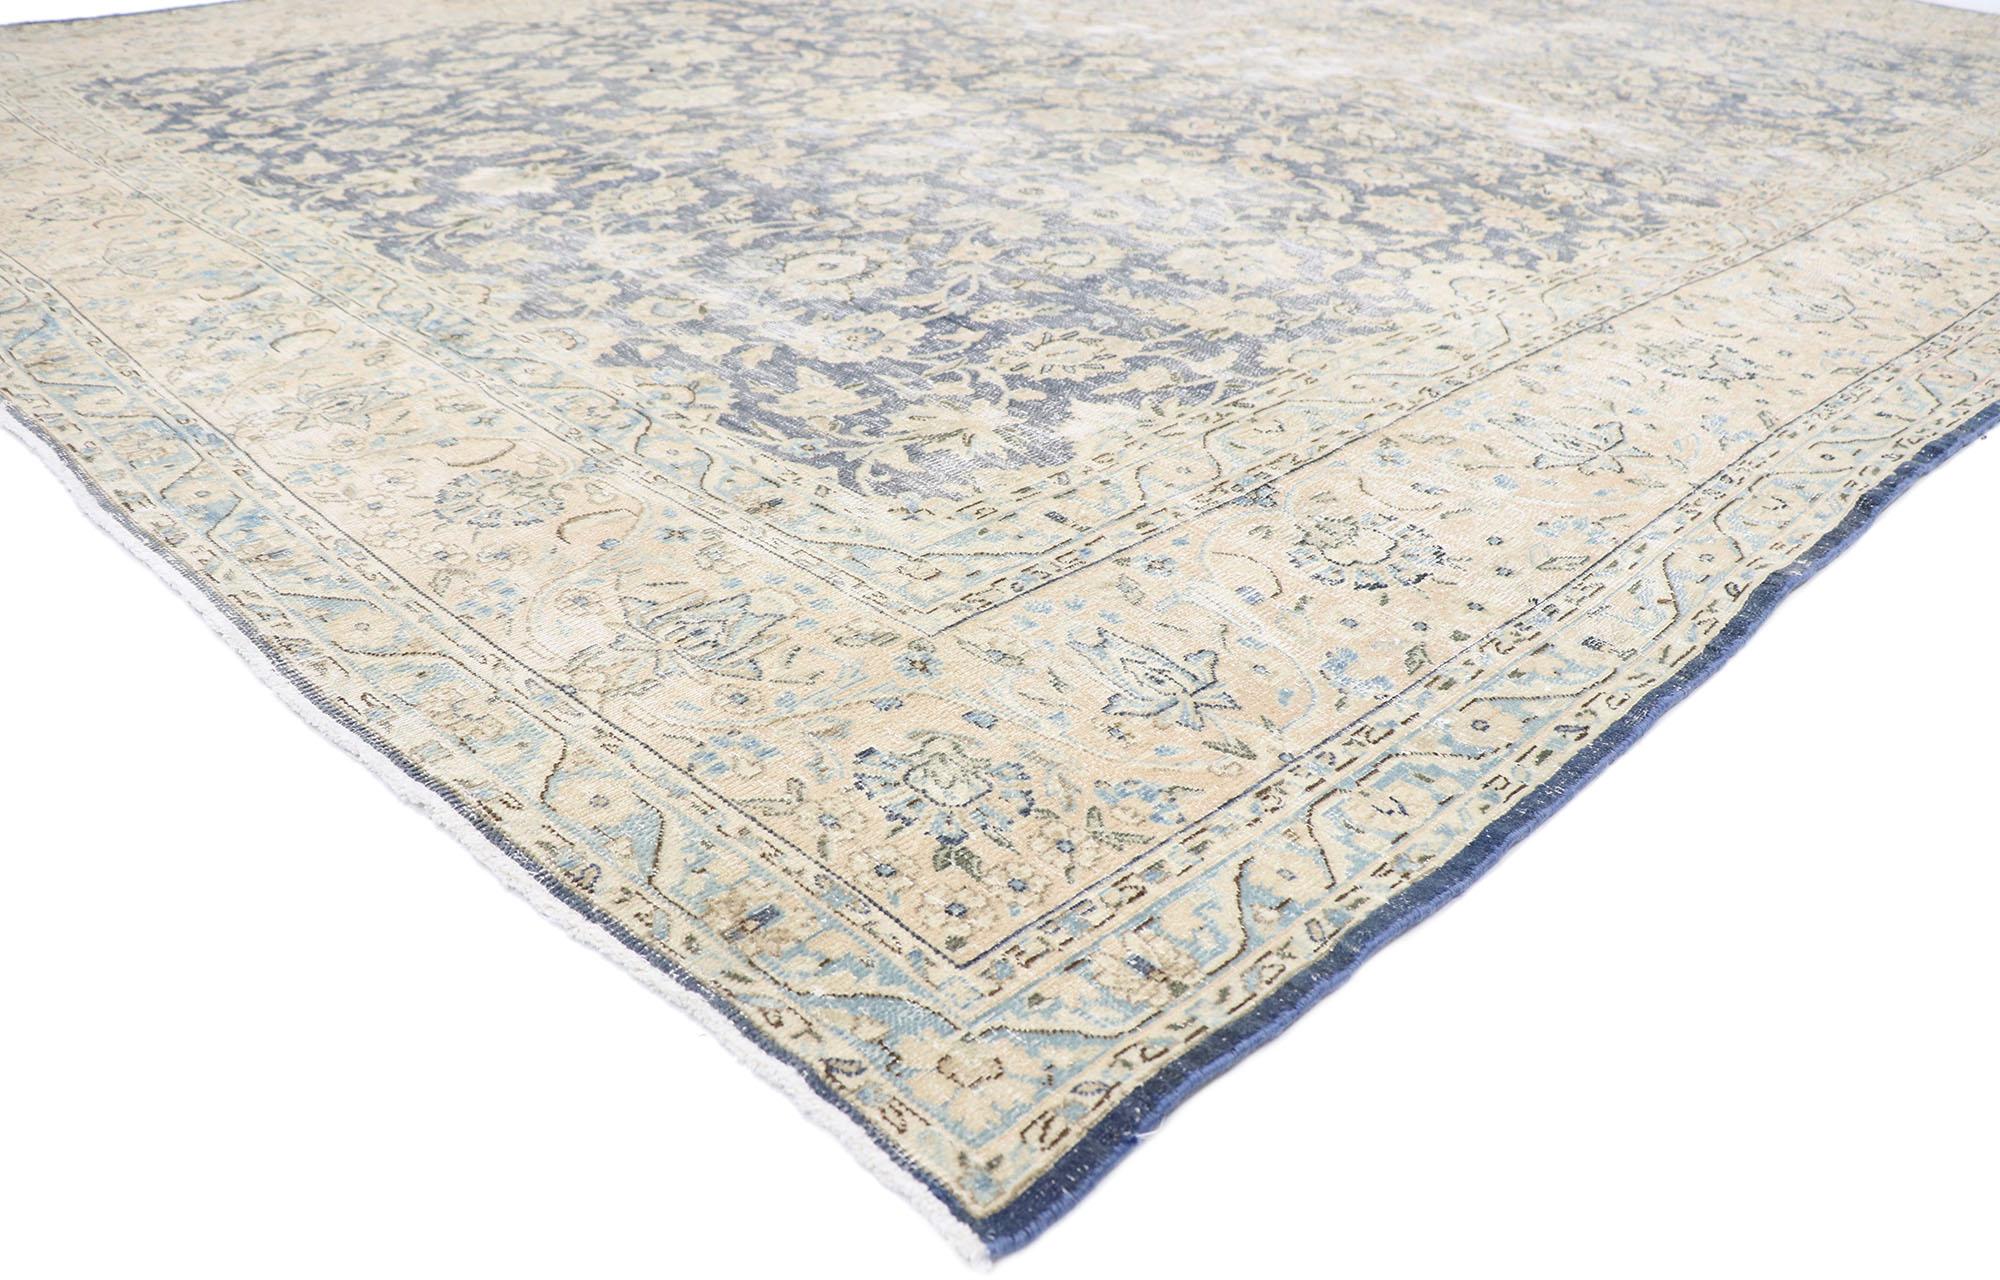 60896 distressed antique Persian Kerman rug with Rustic French Cottage style 10'04 x 13'08. With its perfectly worn-in charm and rustic sensibility, this hand-knotted wool distressed antique Persian Kerman rug will take on a curated lived-in look